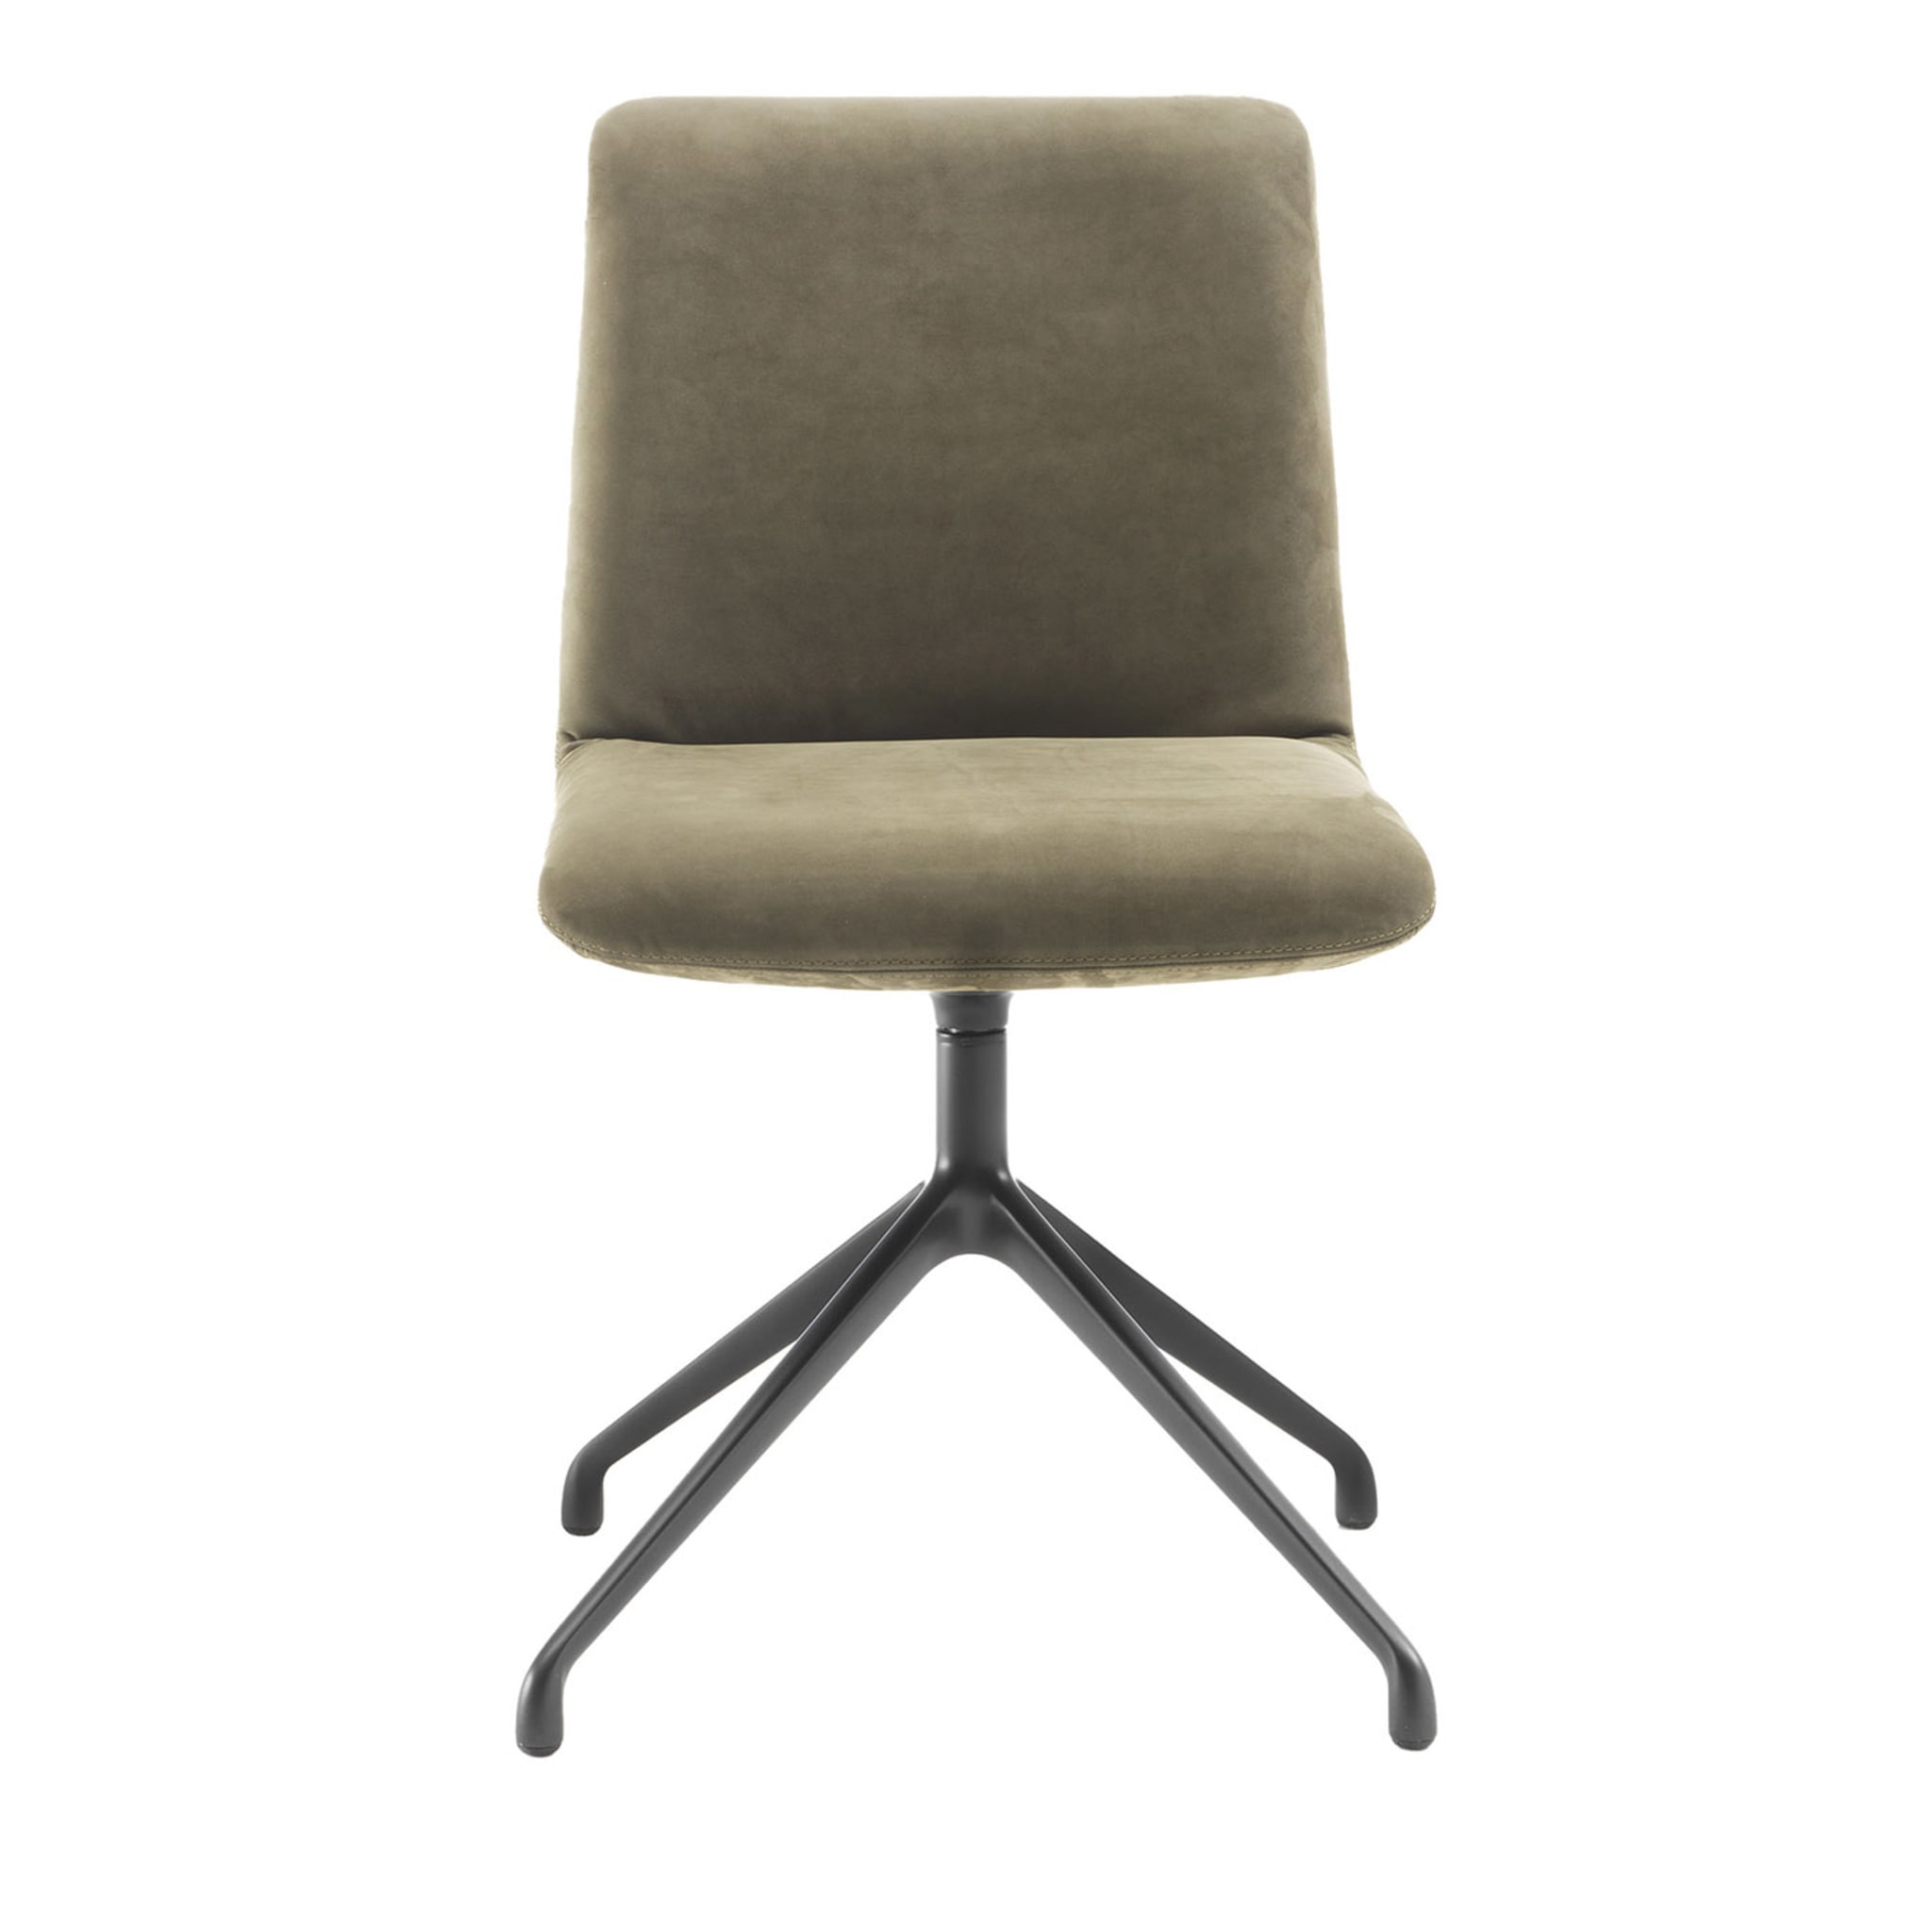 Materia Soft Swivel Sage-Green Chair by Claudio Bellini - Main view